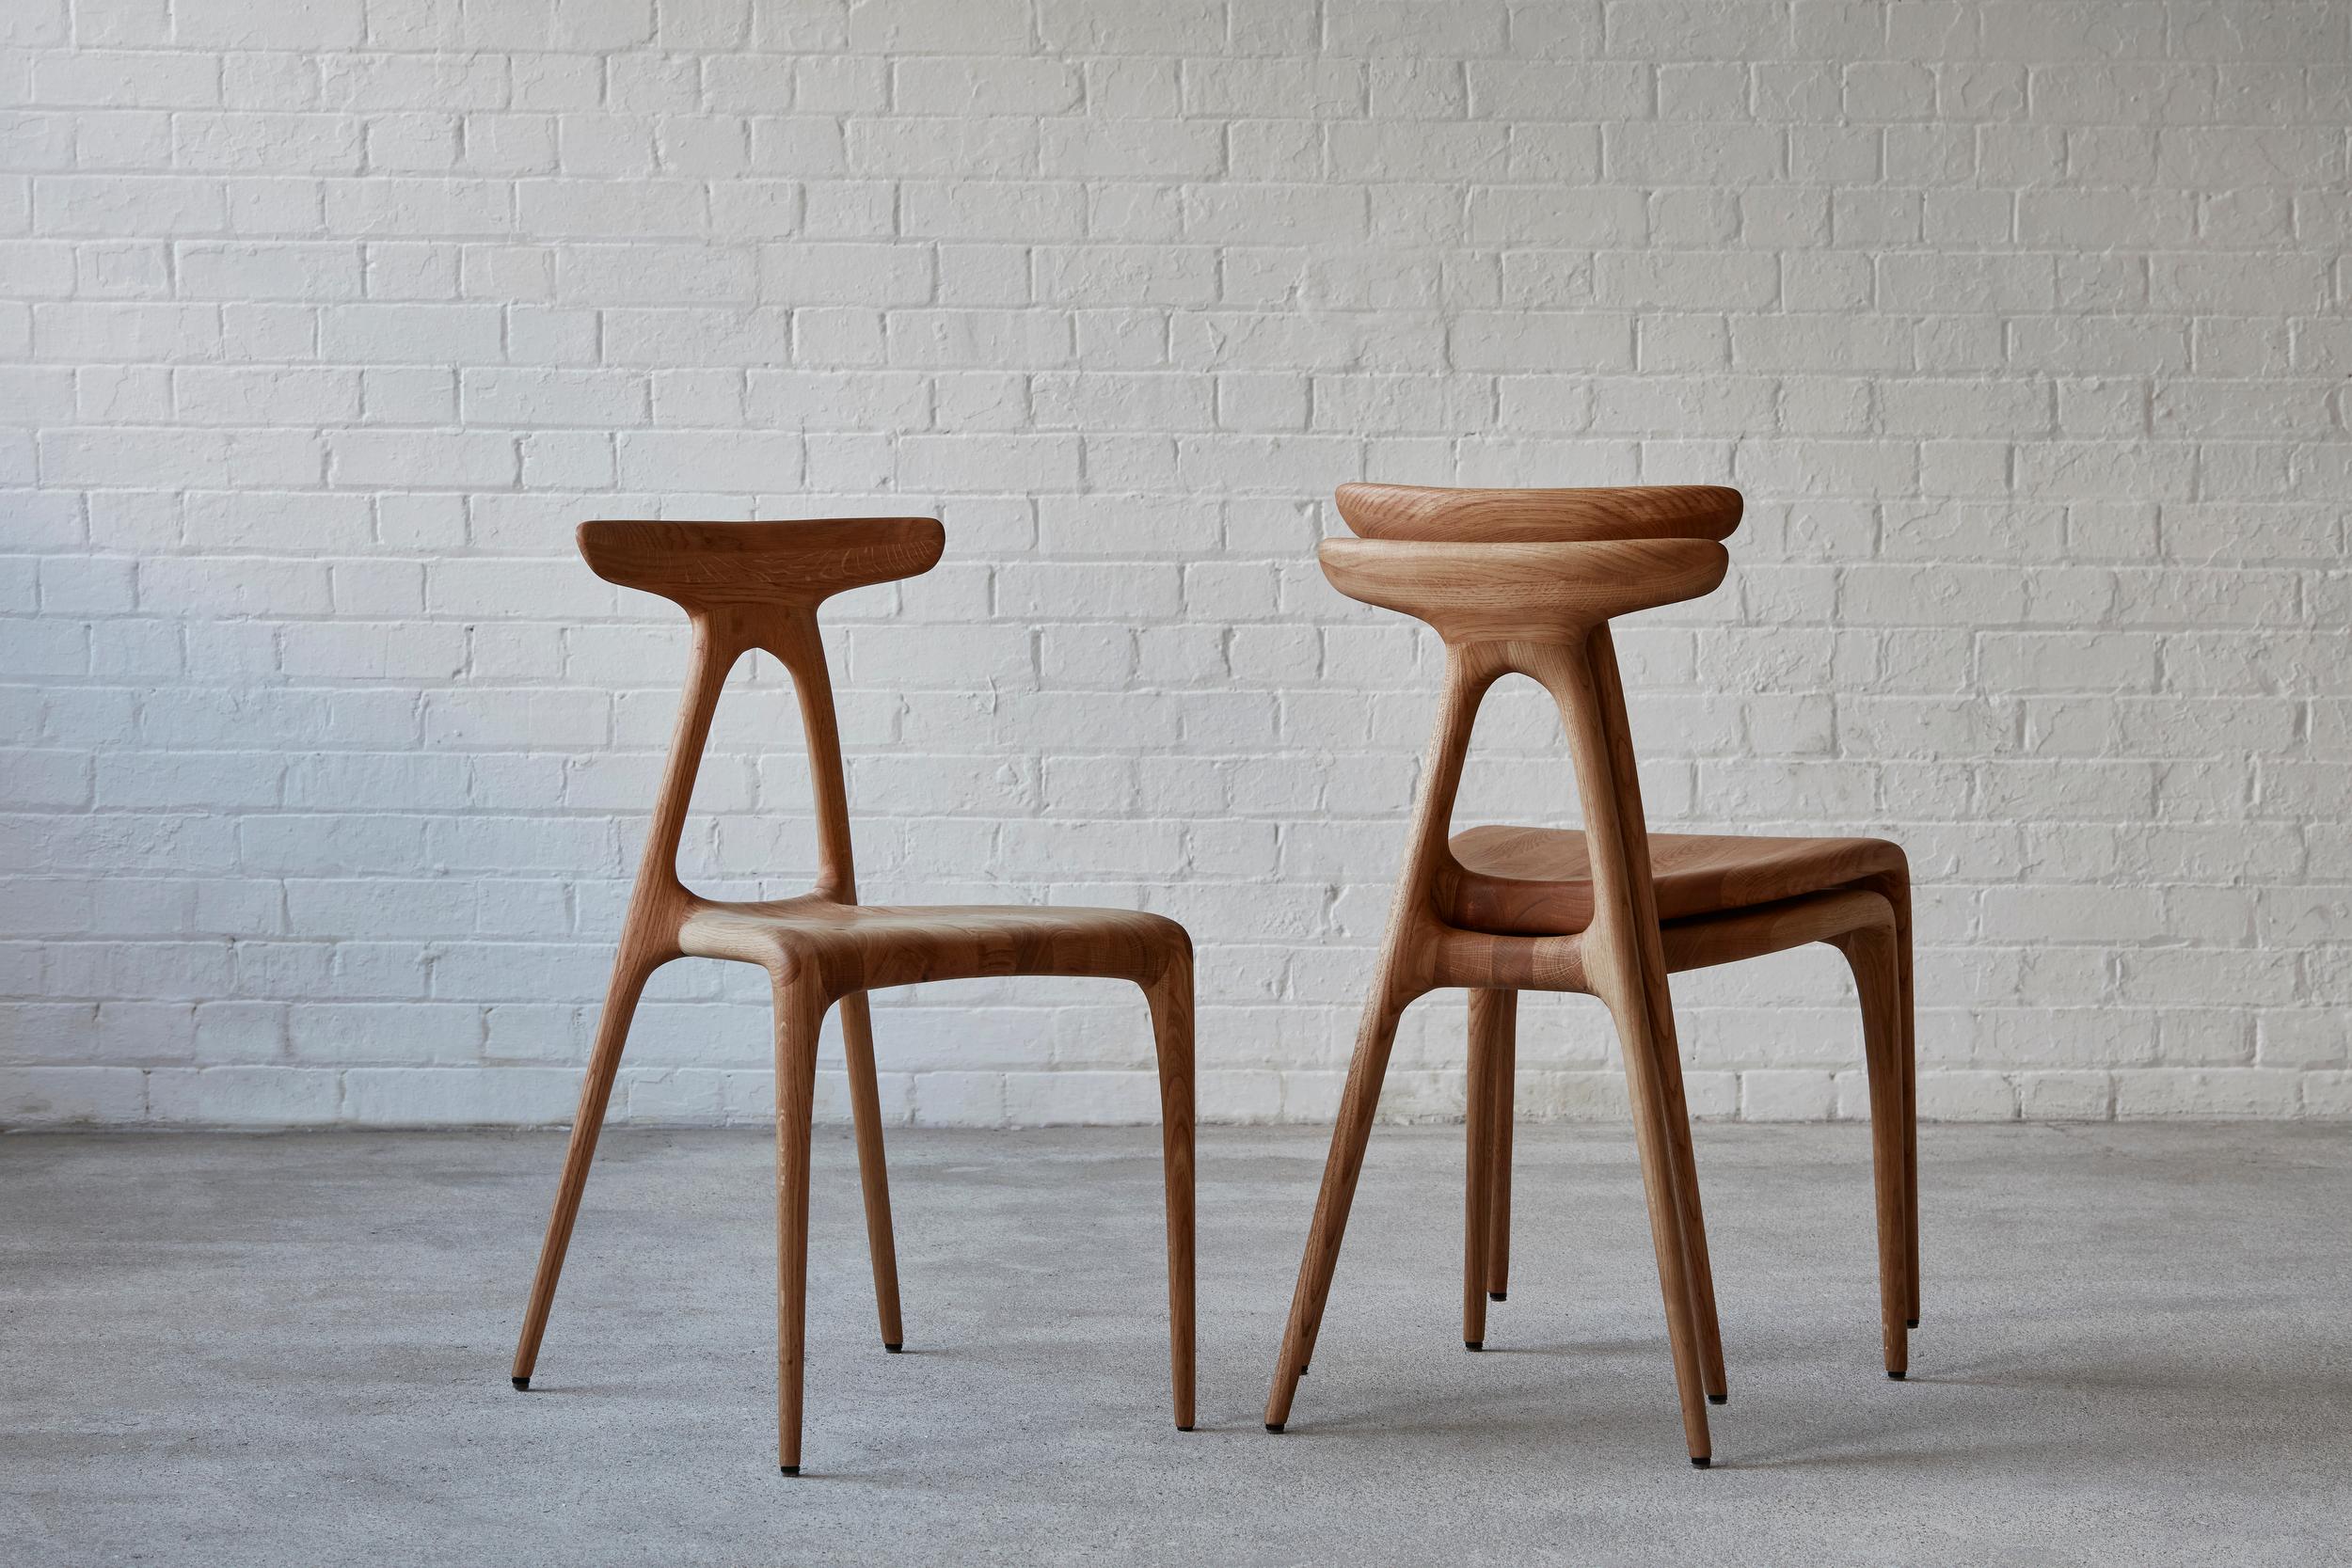 A contemporary solid-wood all-purpose stackable chair produced using the latest production technologies of shaped wooden furniture. The design boasts a strong architectural gesture that gives the chair its inherent strength: the a shaped structure